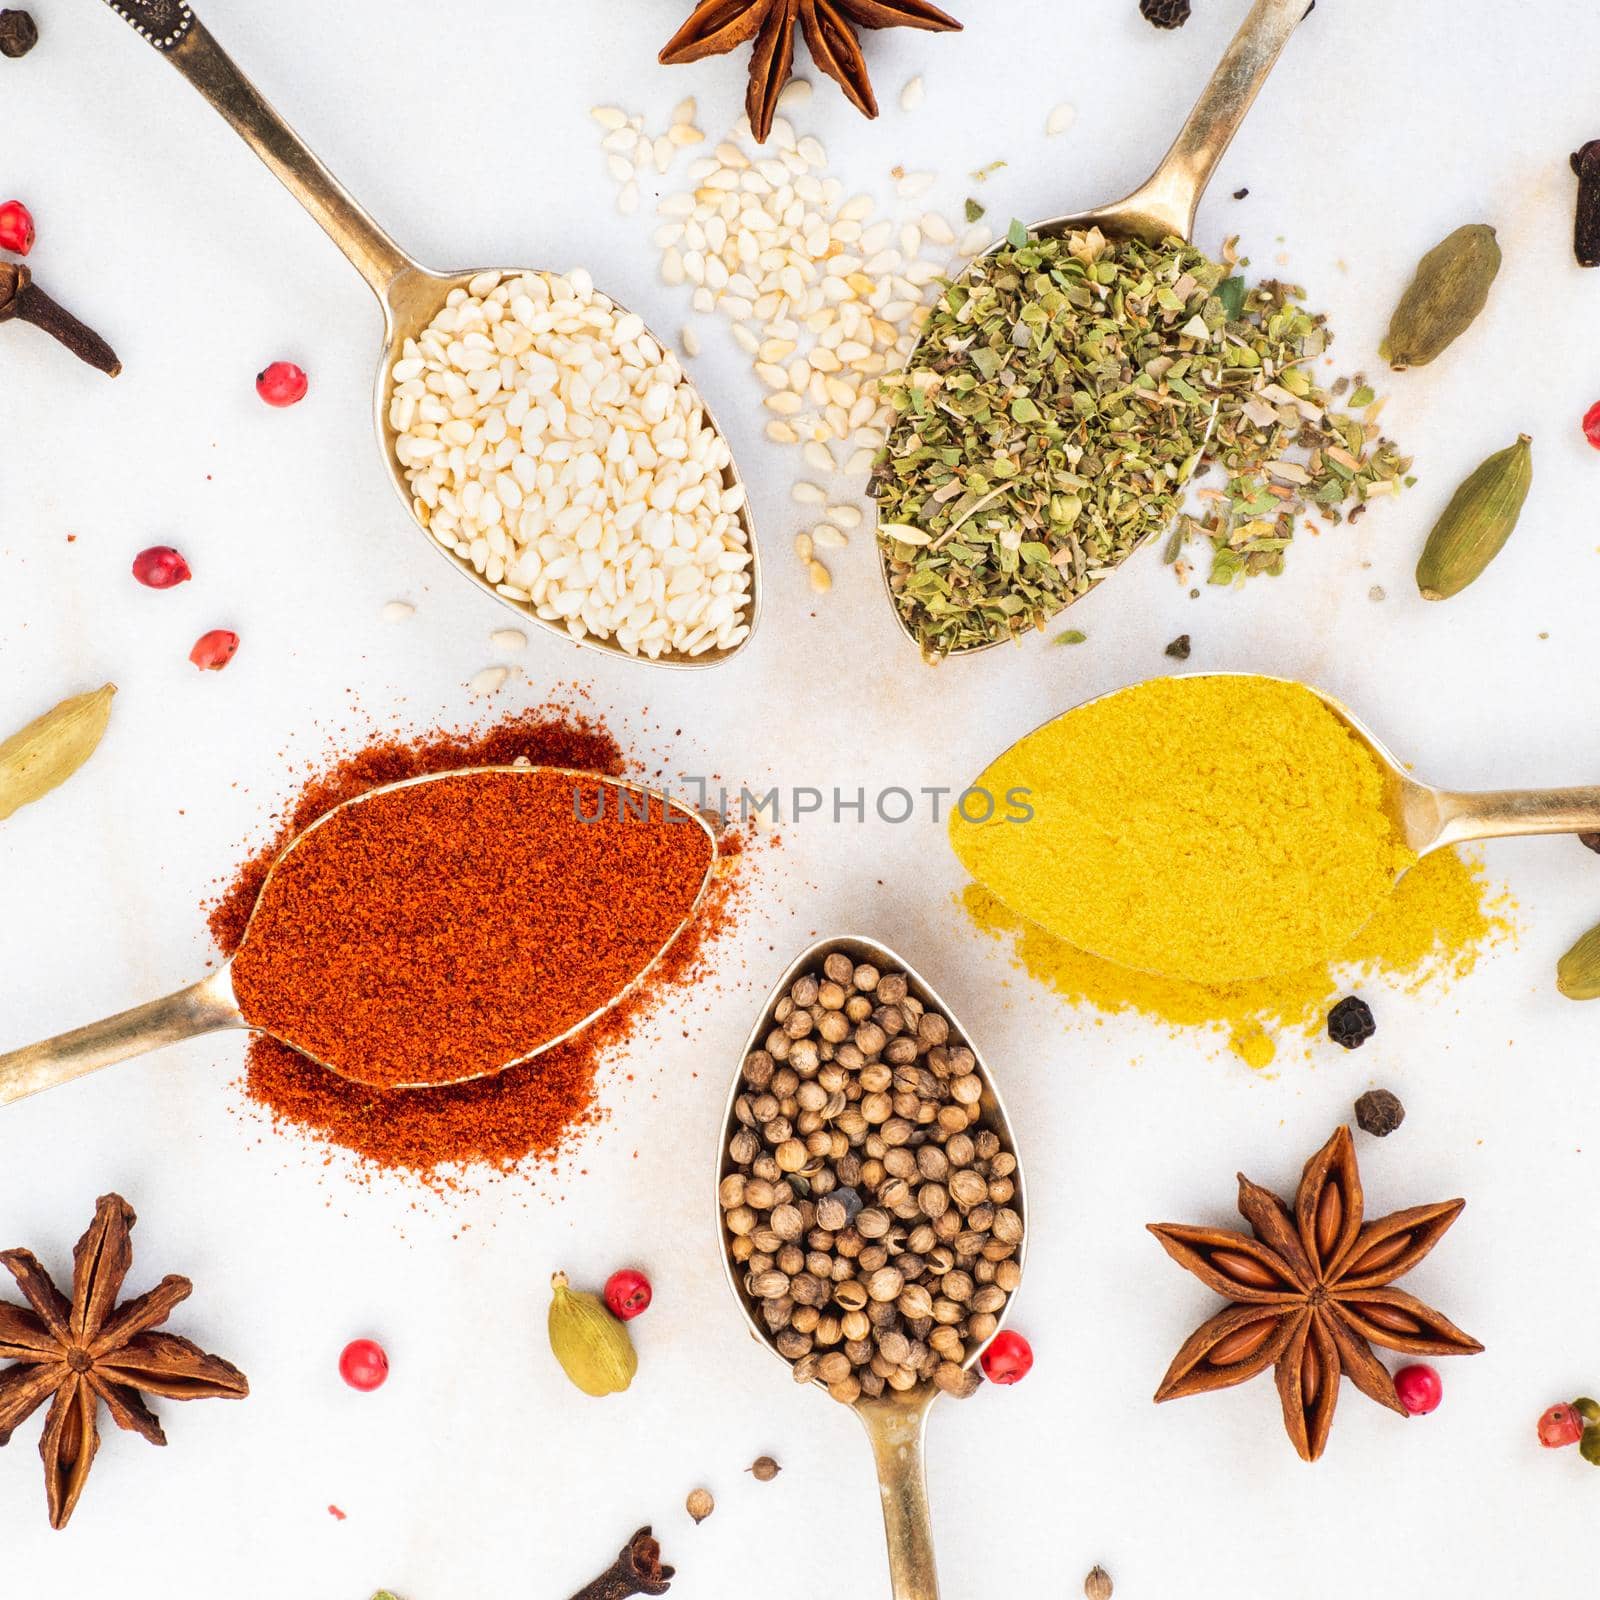 Set of spices in spoons on white background, top view. Paprika, curry, Bay leaf, anise and other seasonings, flat lay.